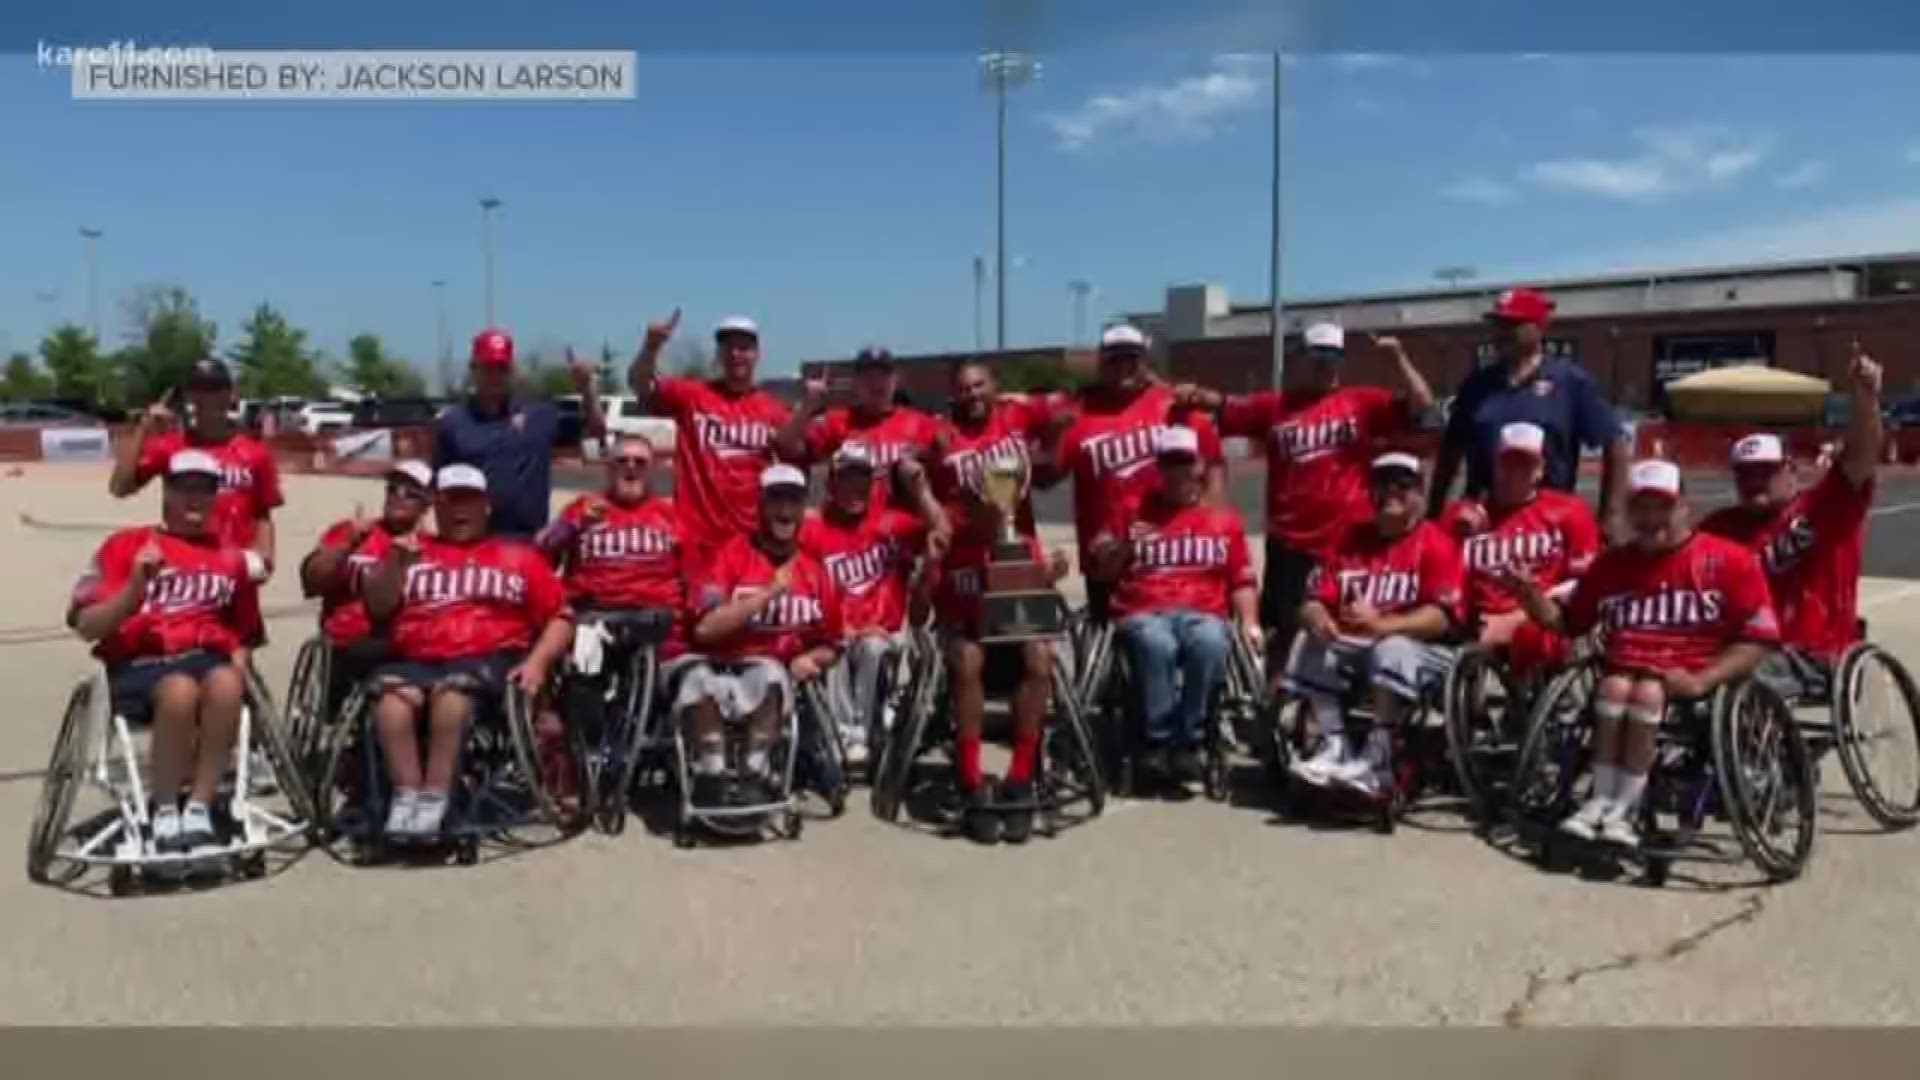 The Rollin Twins took the title with an 11-1 win over a Chicago team.